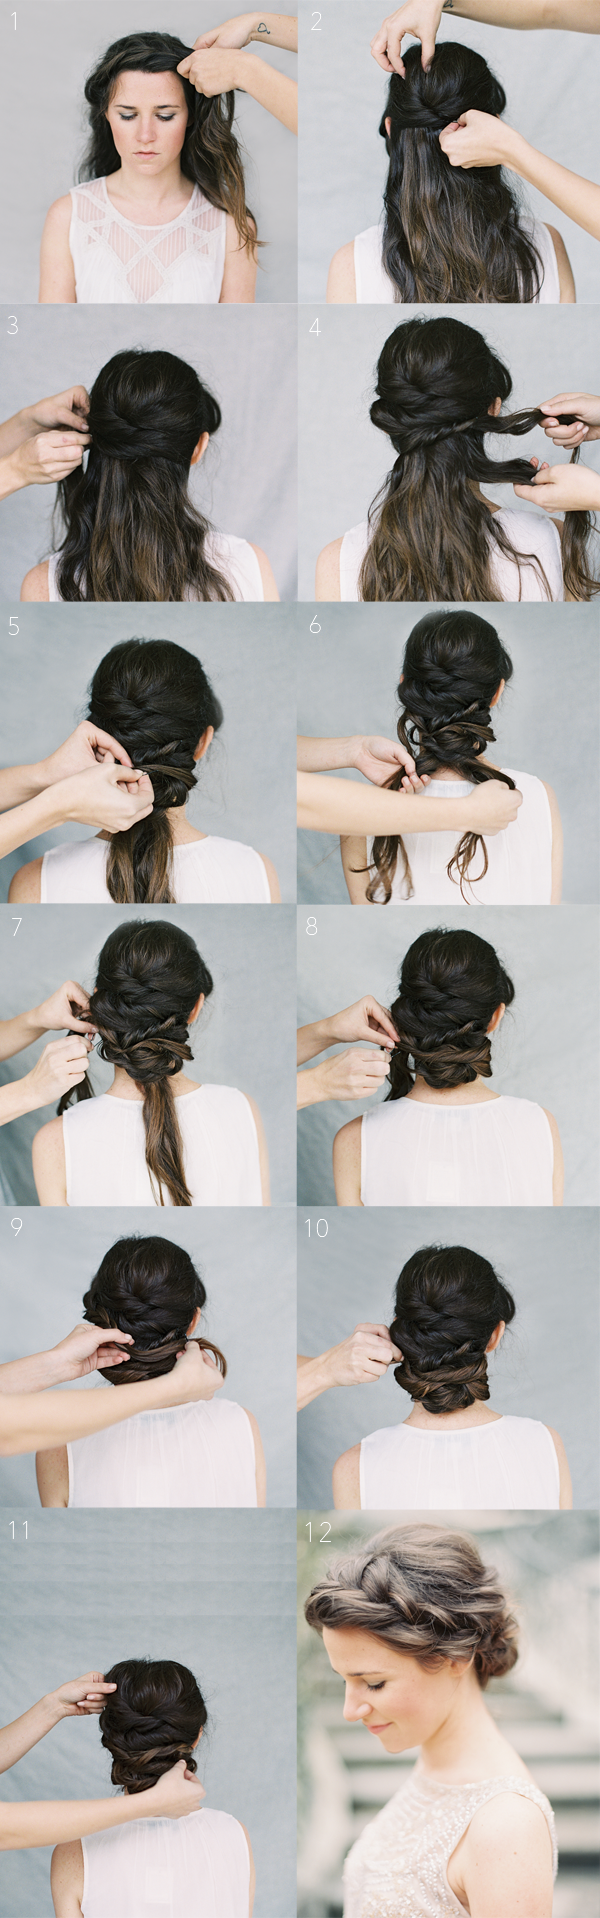 22 Gorgeous Hairstyle Ideas And Tutorials For New Year S Eve